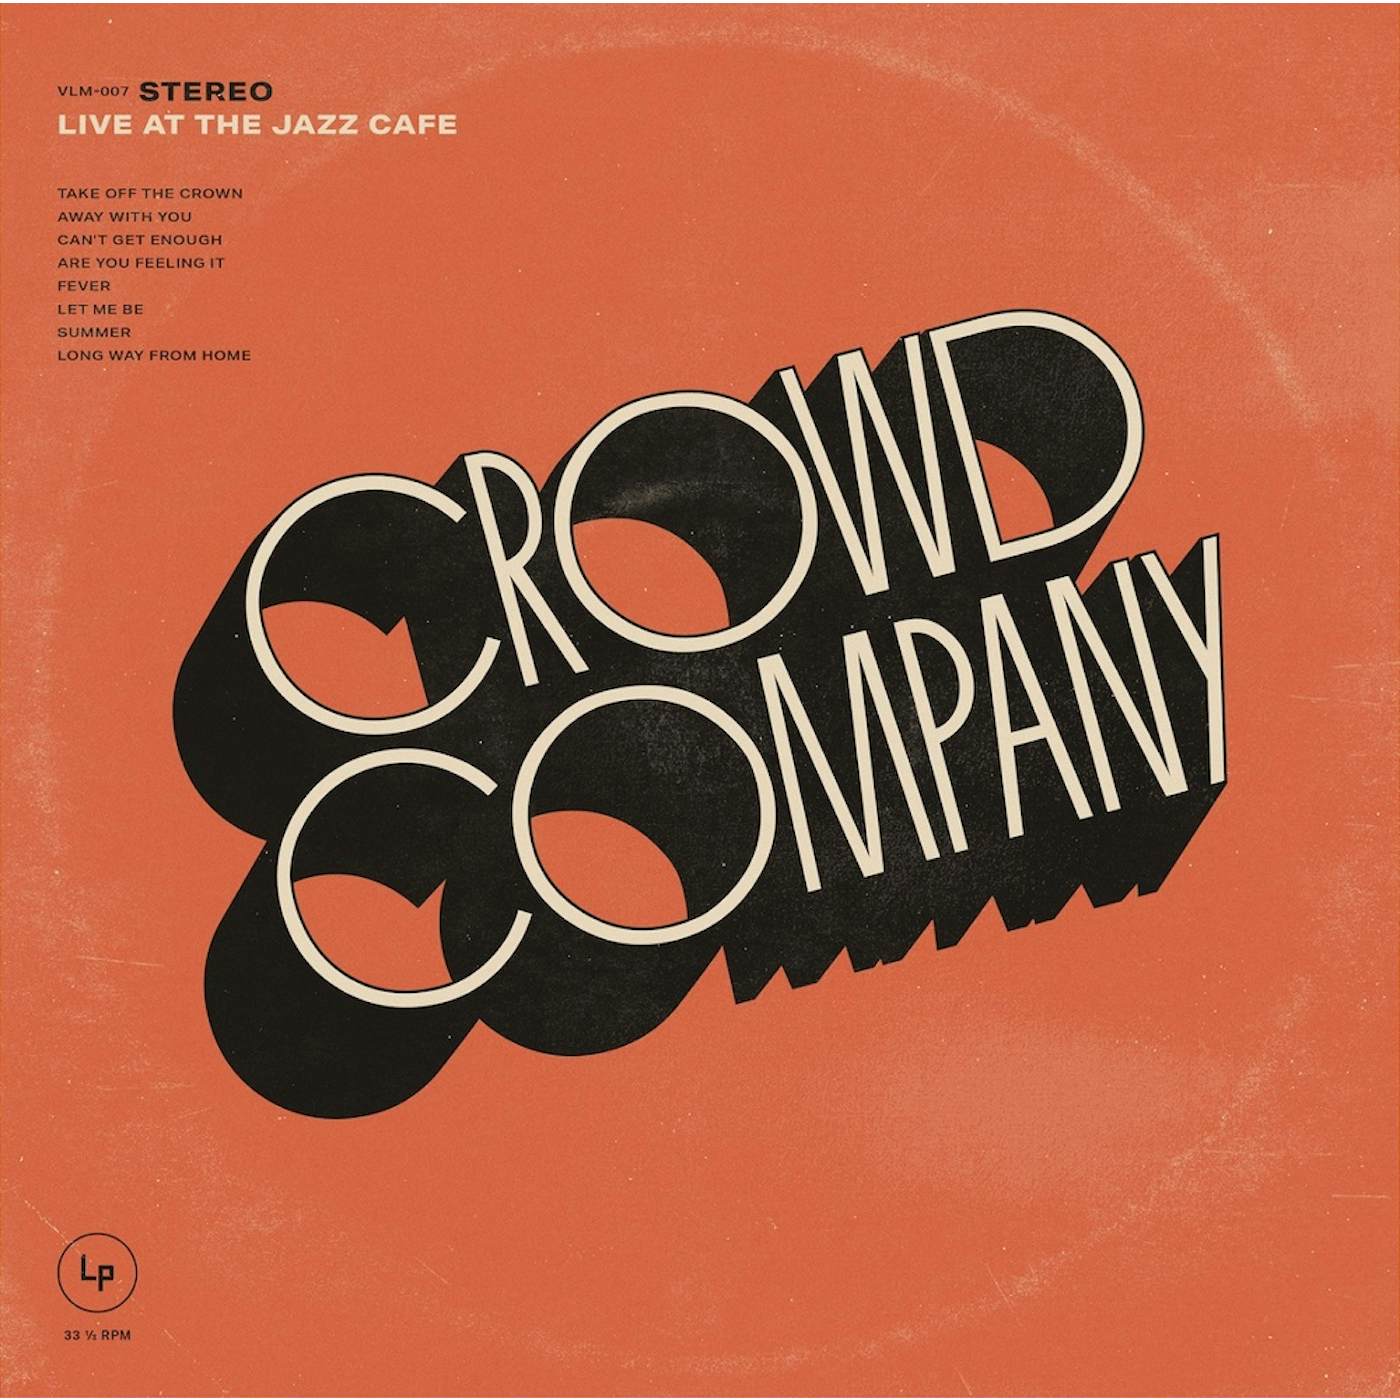 Crowd Company LIVE AT THE JAZZ CAFE CD